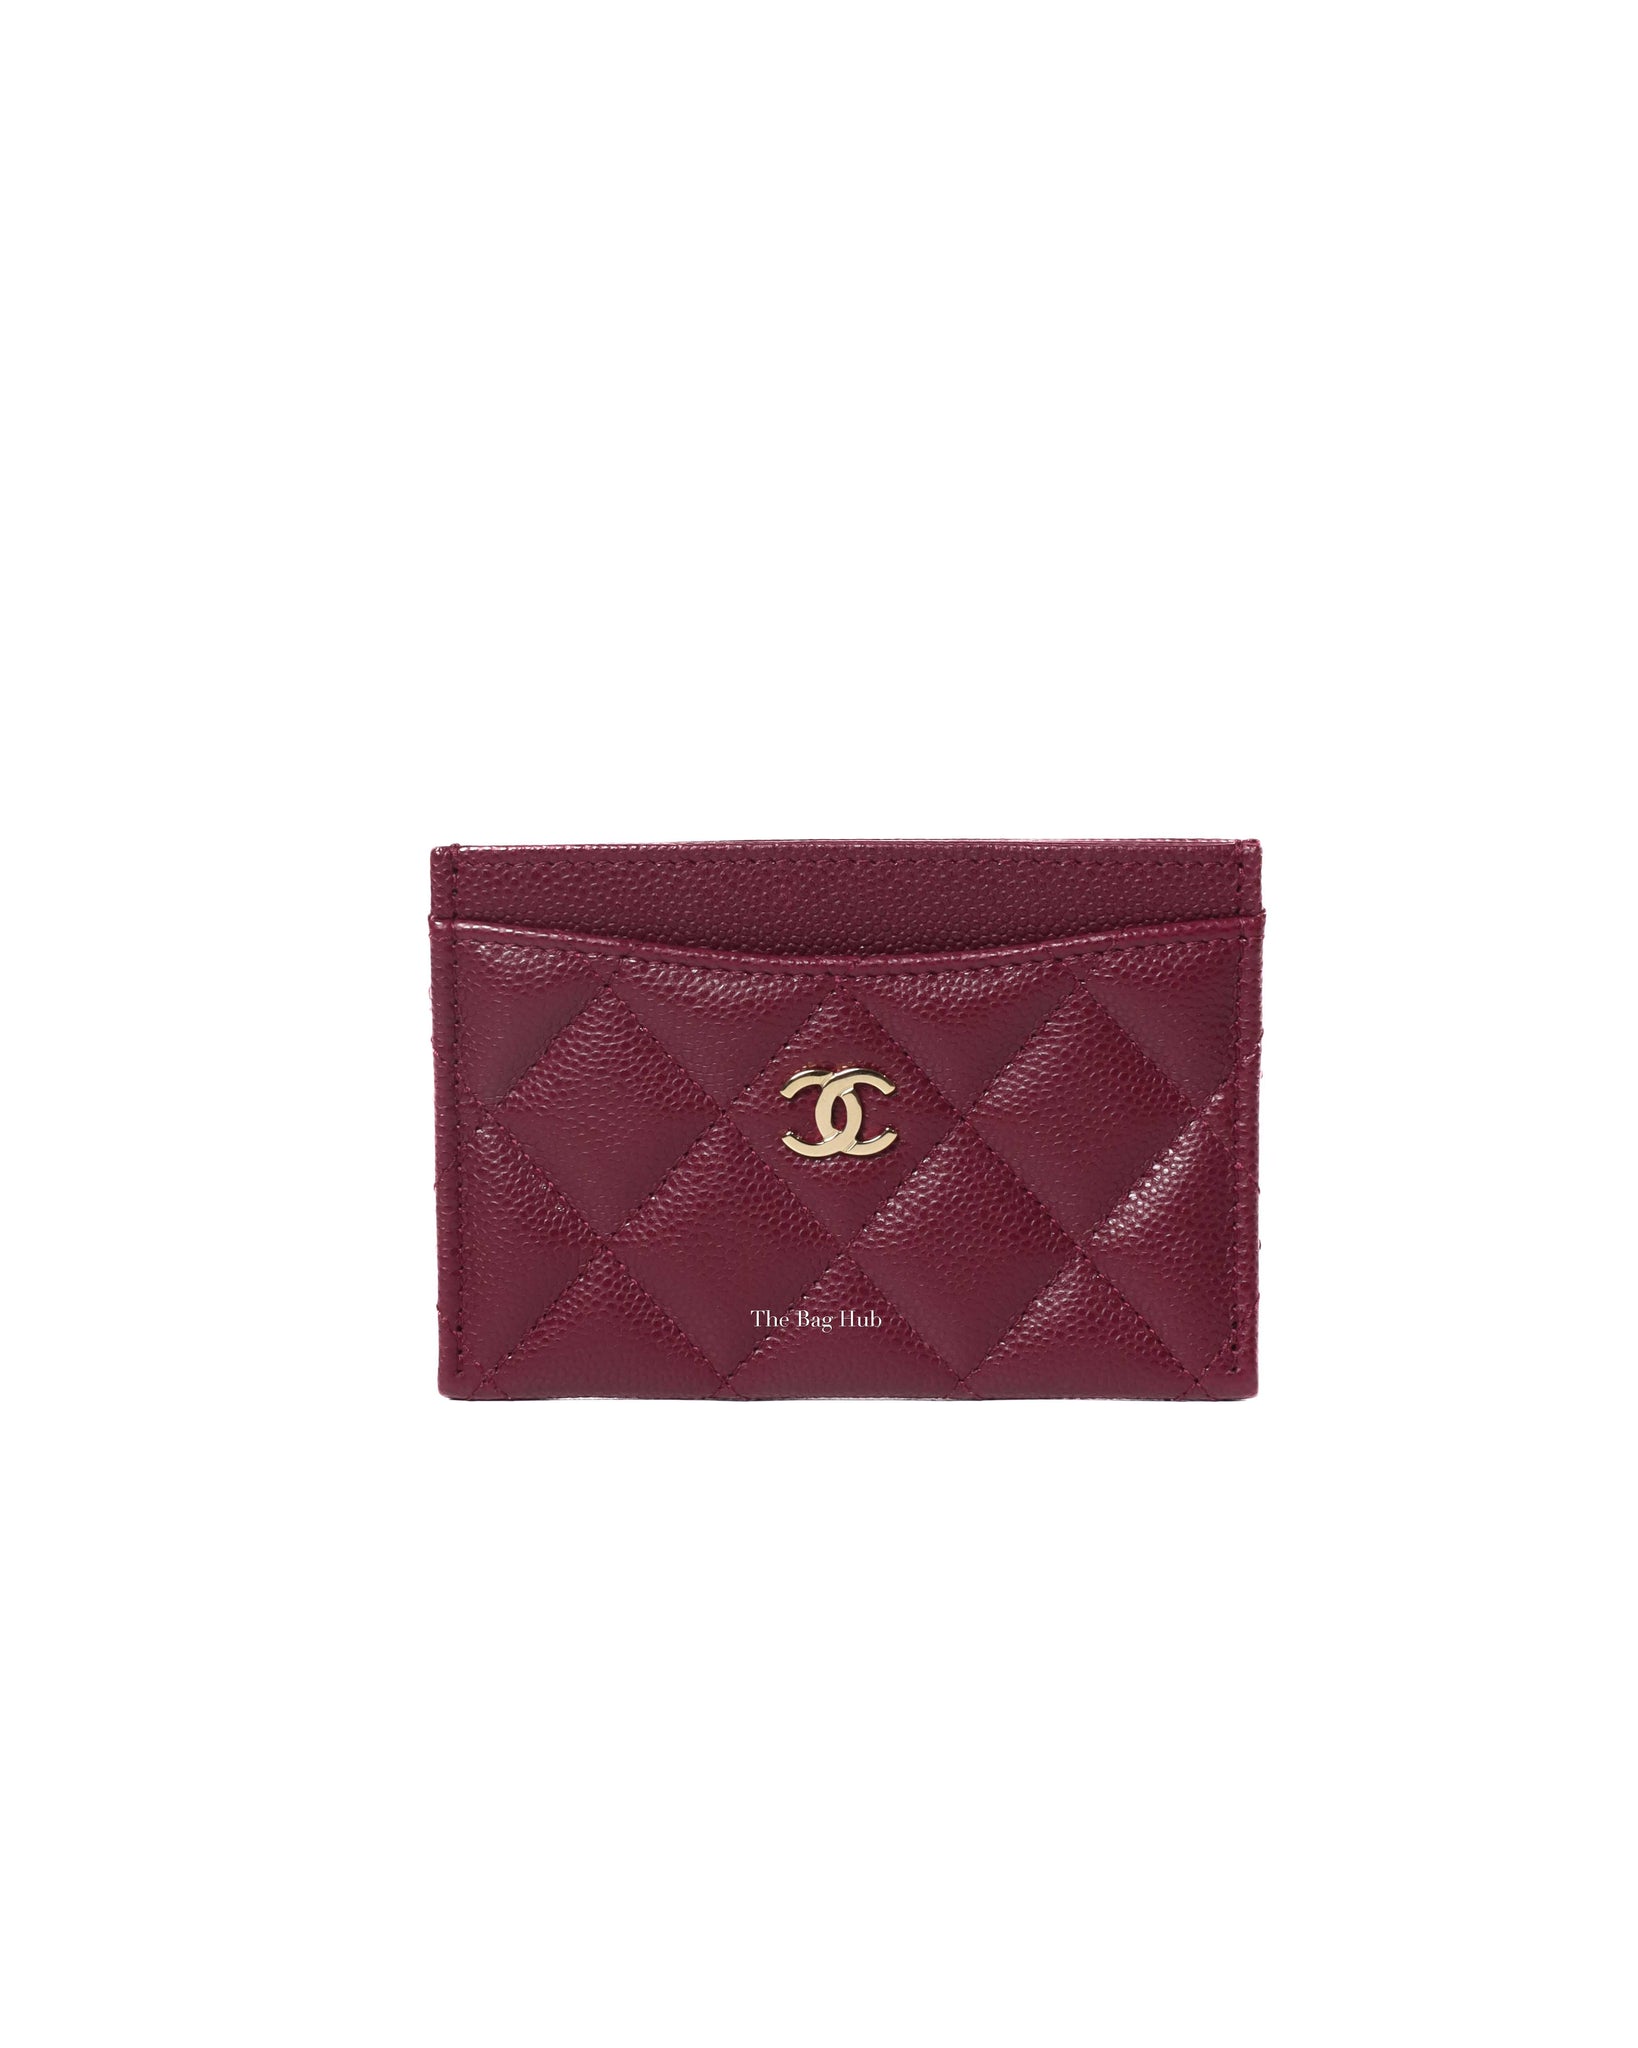 Shop CHANEL Flap Card Holder (AP3400 B12928 NO206) by Marchedeluxe